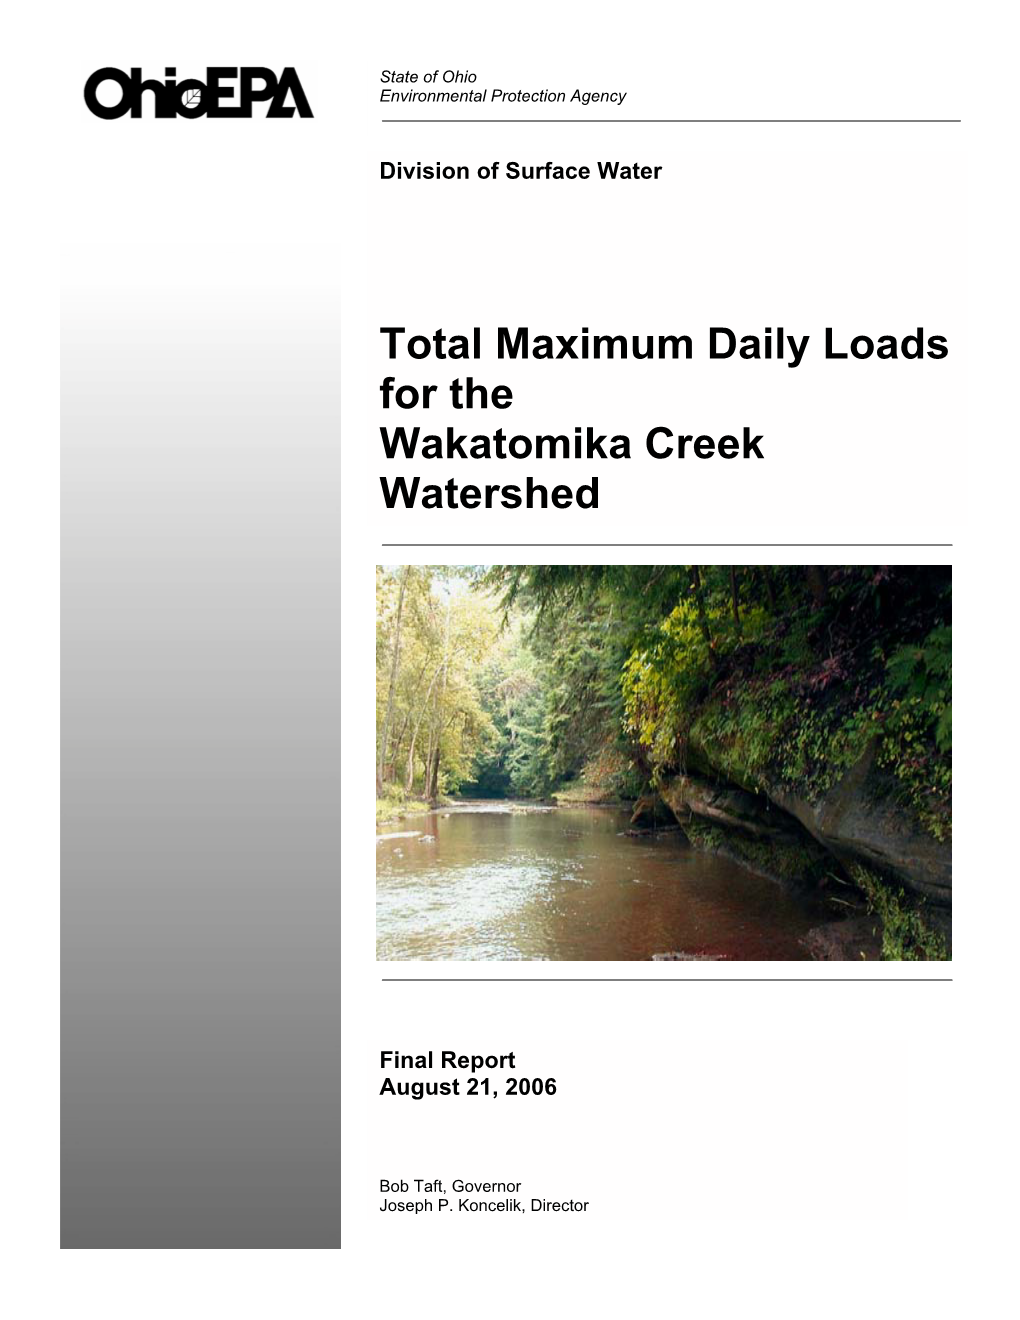 Total Maximum Daily Loads for the Wakatomika Creek Watershed